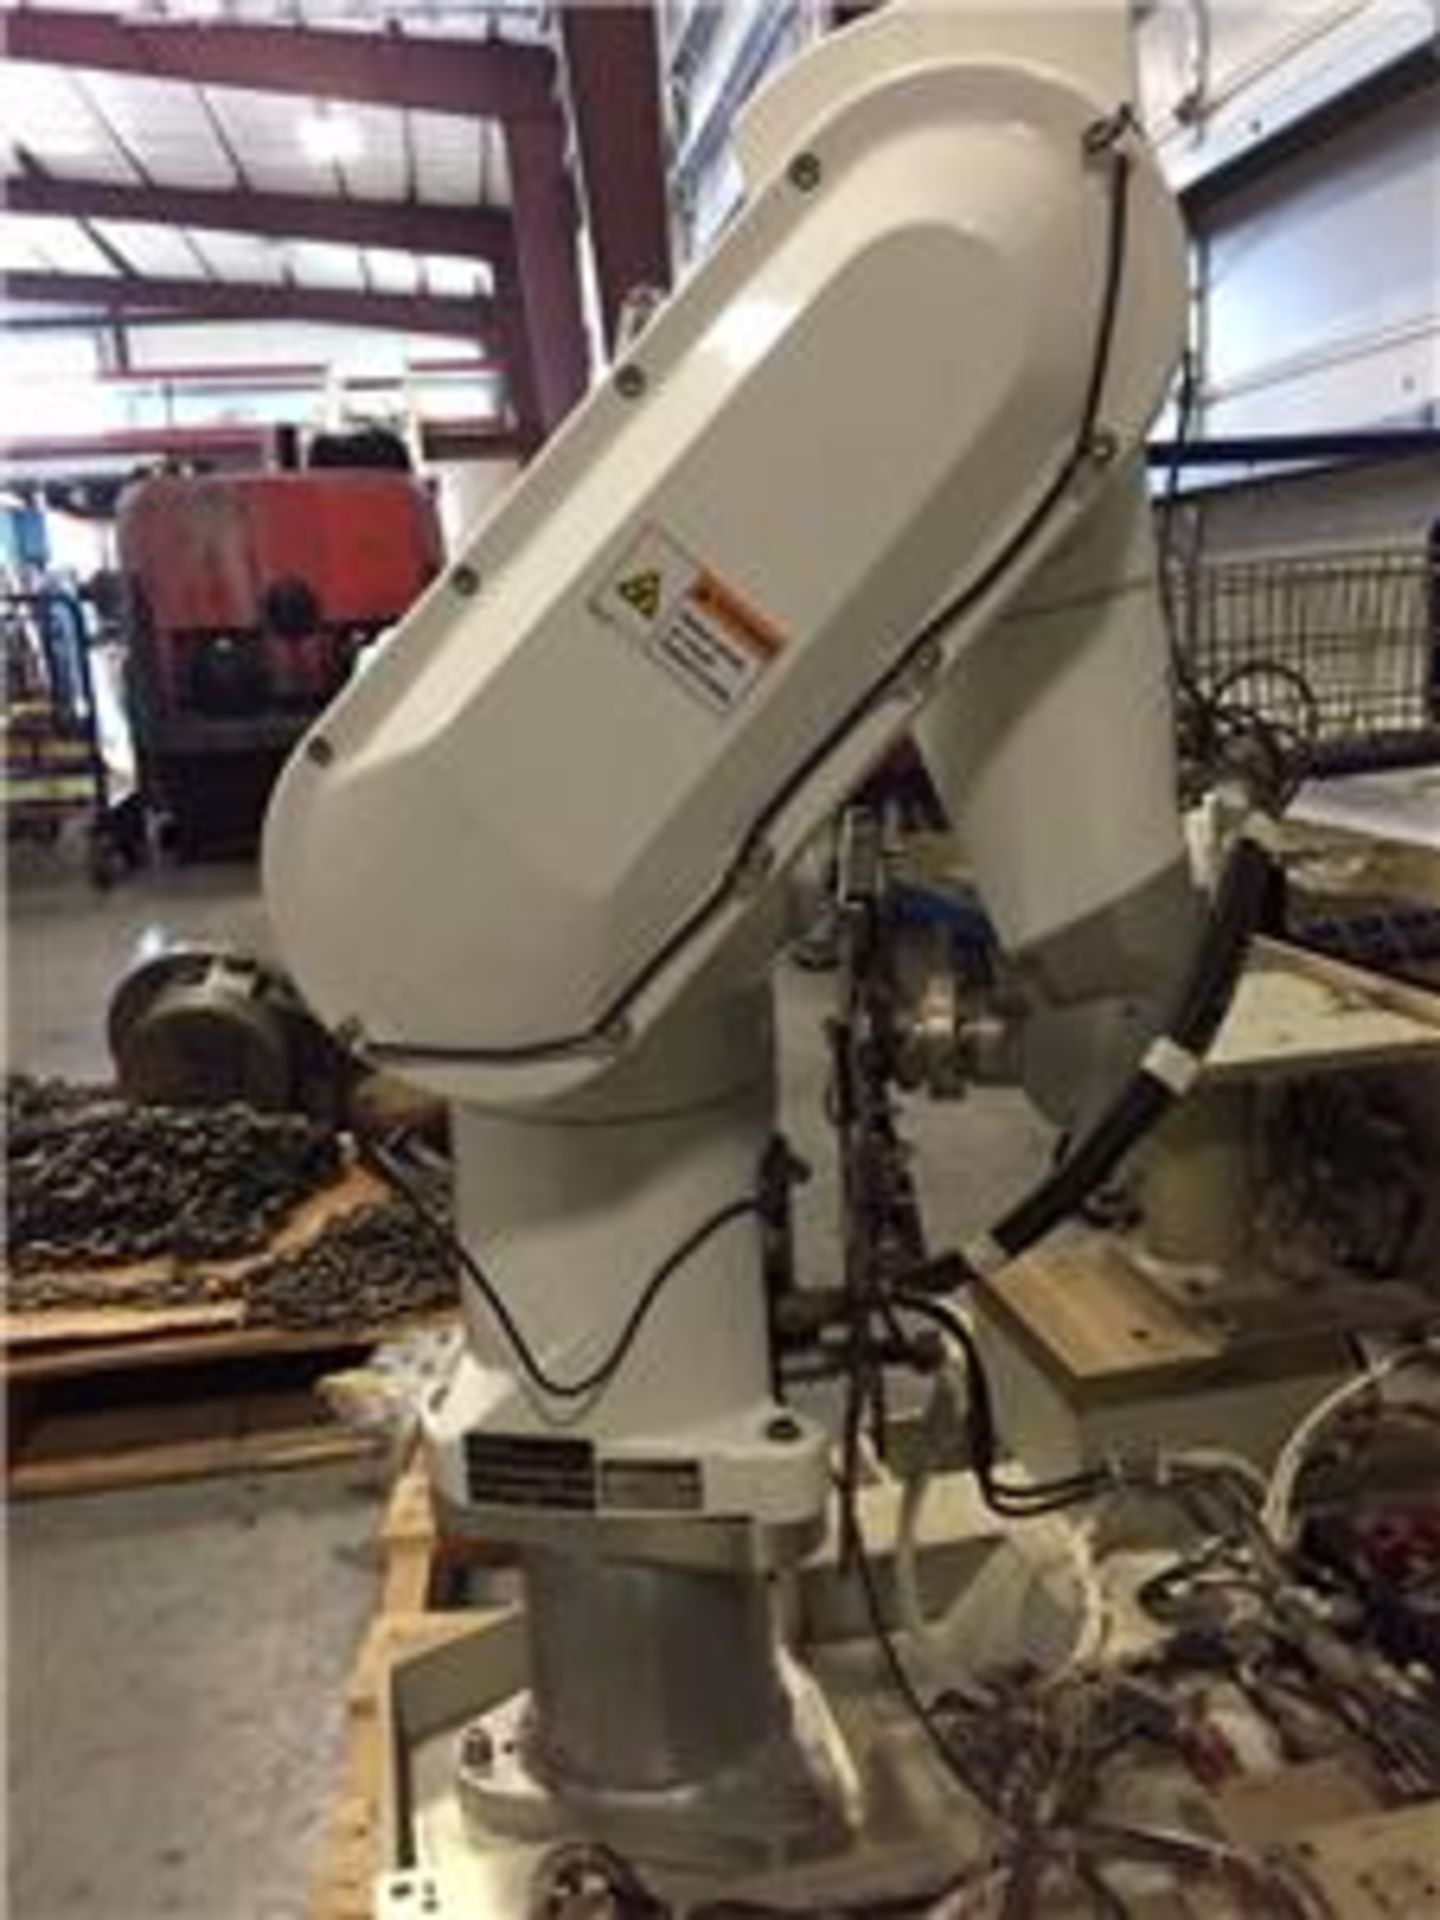 Staubli RX60 SCRsvg Lithography 865-003-001 With Base.  Robot Arm. - Image 2 of 8